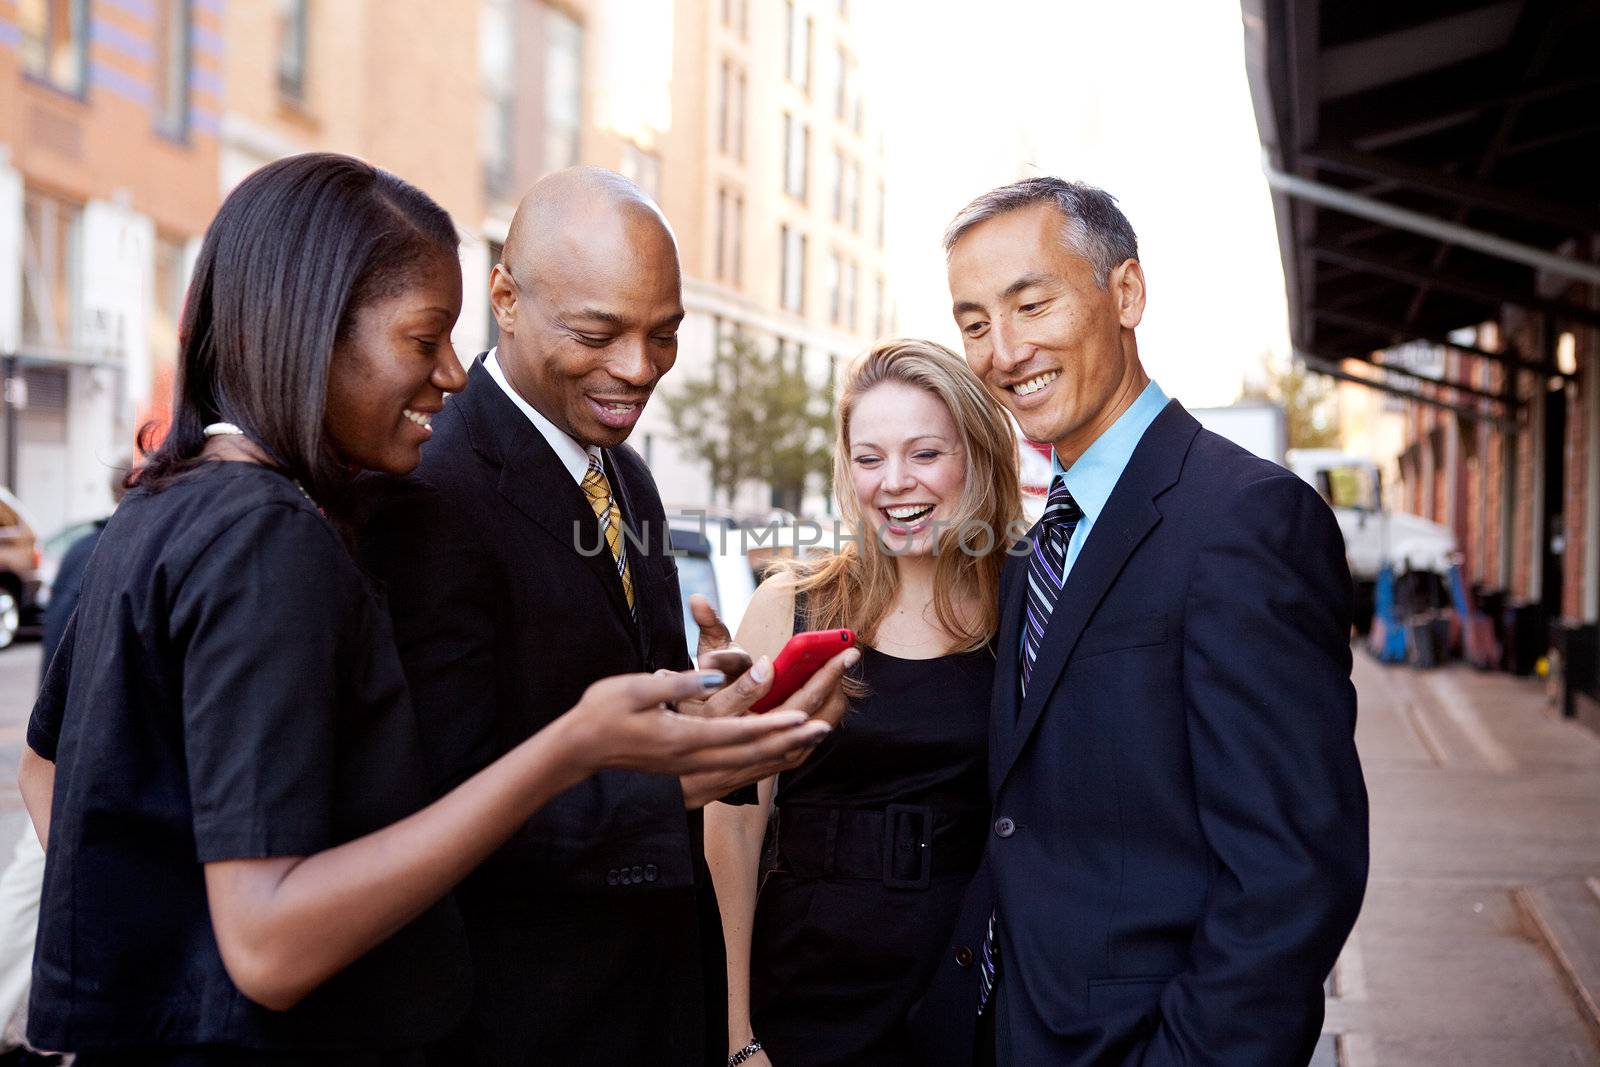 A group of business people looking at a cell phone and laughing